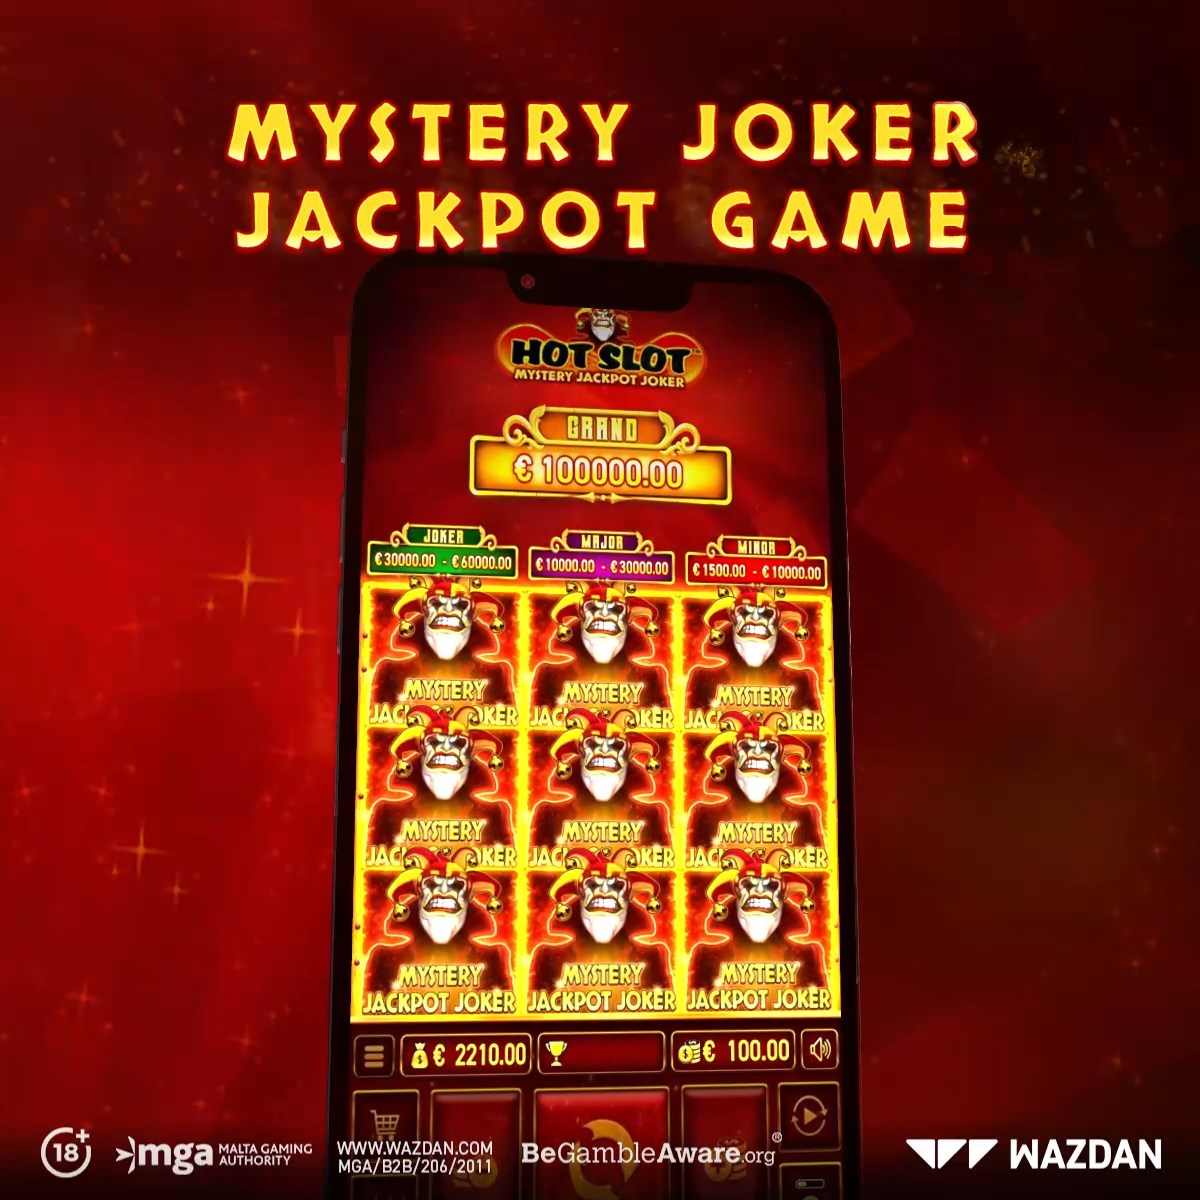 Have you tried our exciting Hot Slot™: Mystery Jackpot Joker yet? Go wild and spin to win!&#127183;

Trust us, the Joker is no joke!  

18+ | Play Responsibly

&#160;&#160;